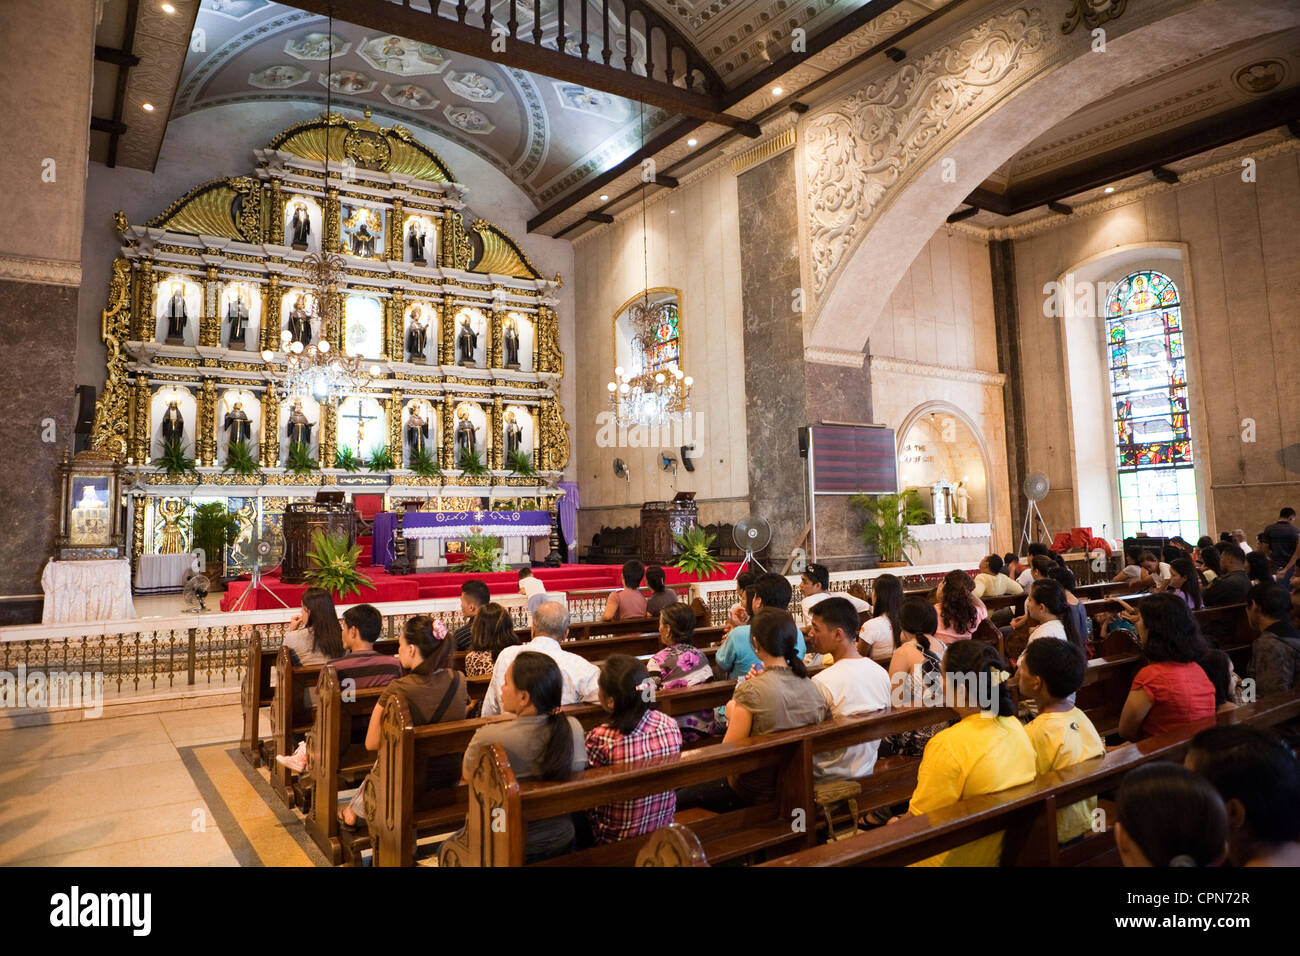 Basilica Minore del Santo Niño de Cebu - SAY'RI NIÑO  Here's the mass  schedule for the Solemnity of the Immaculate Conception of the Blessed  Virgin Mary at the Basilica on December